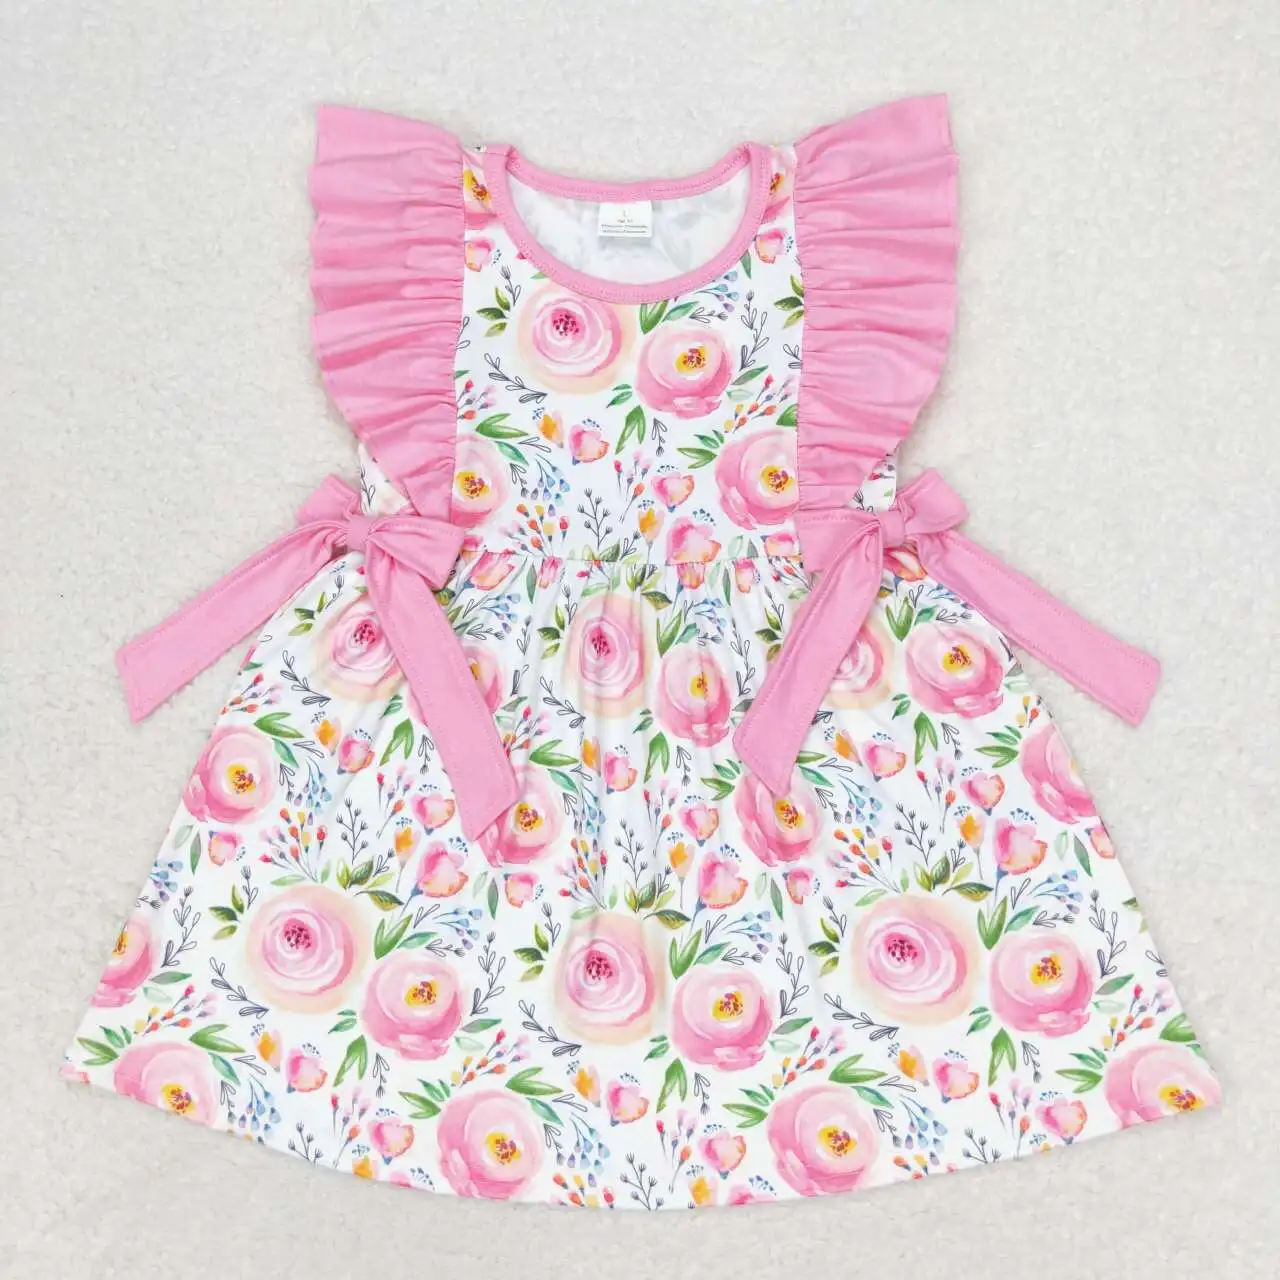 

Boutique Baby Girls cute floral Dress Wholesale Clothing Children Kids Sleeveless pink twirl Skirts New styles summer clothes